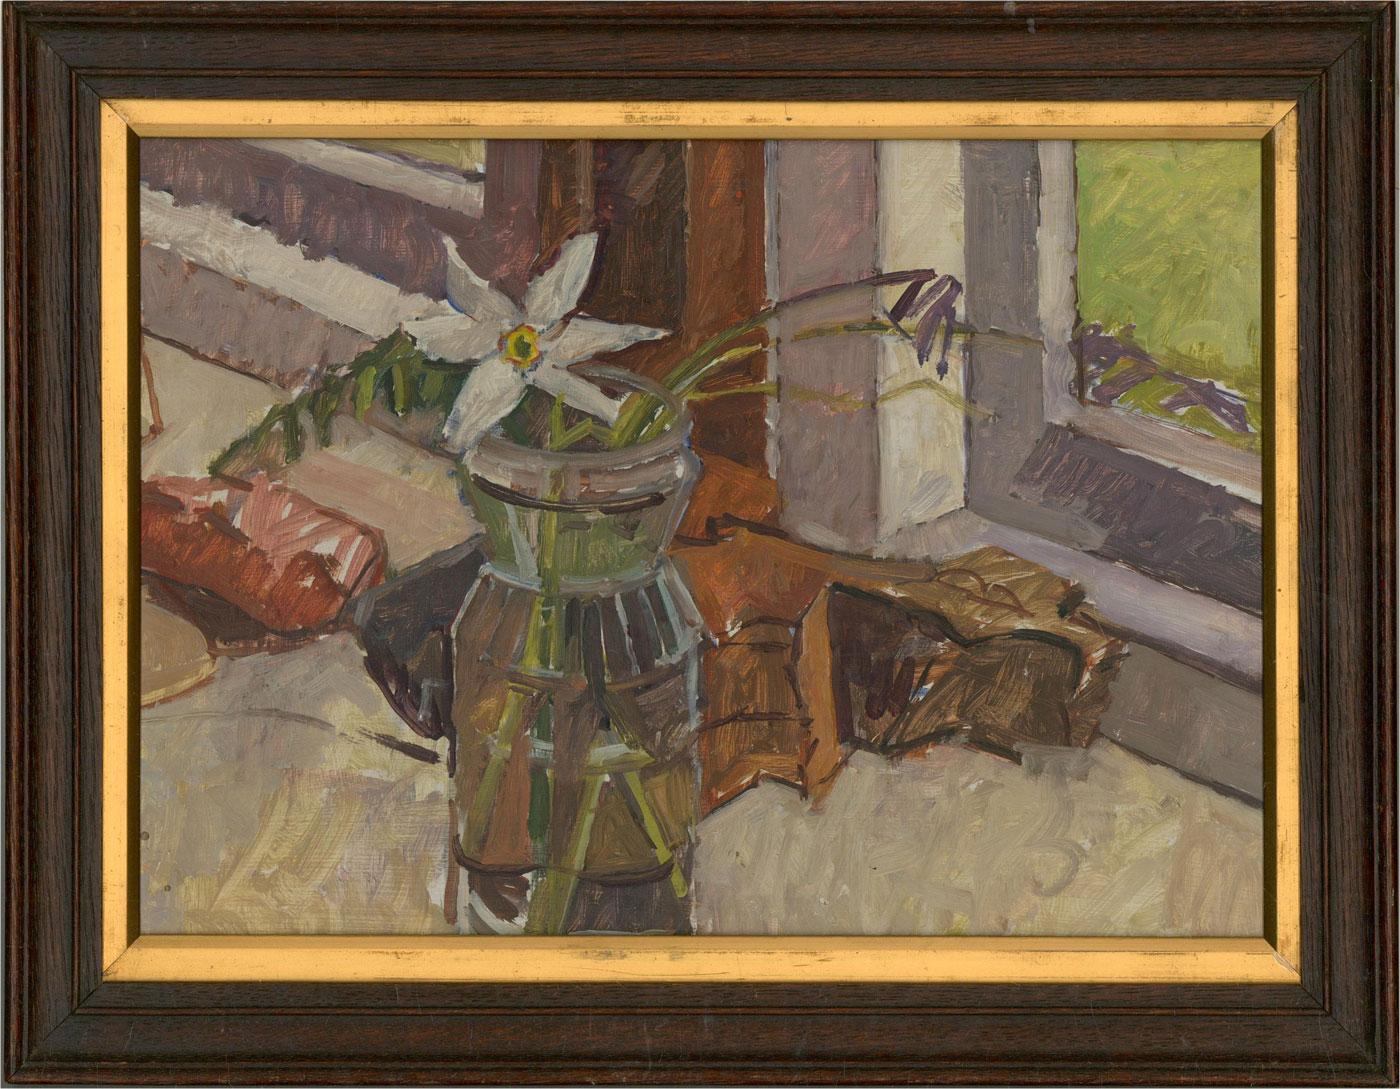 Roger Bliss - 20th Century Oil, White Flower by Window Sill 3